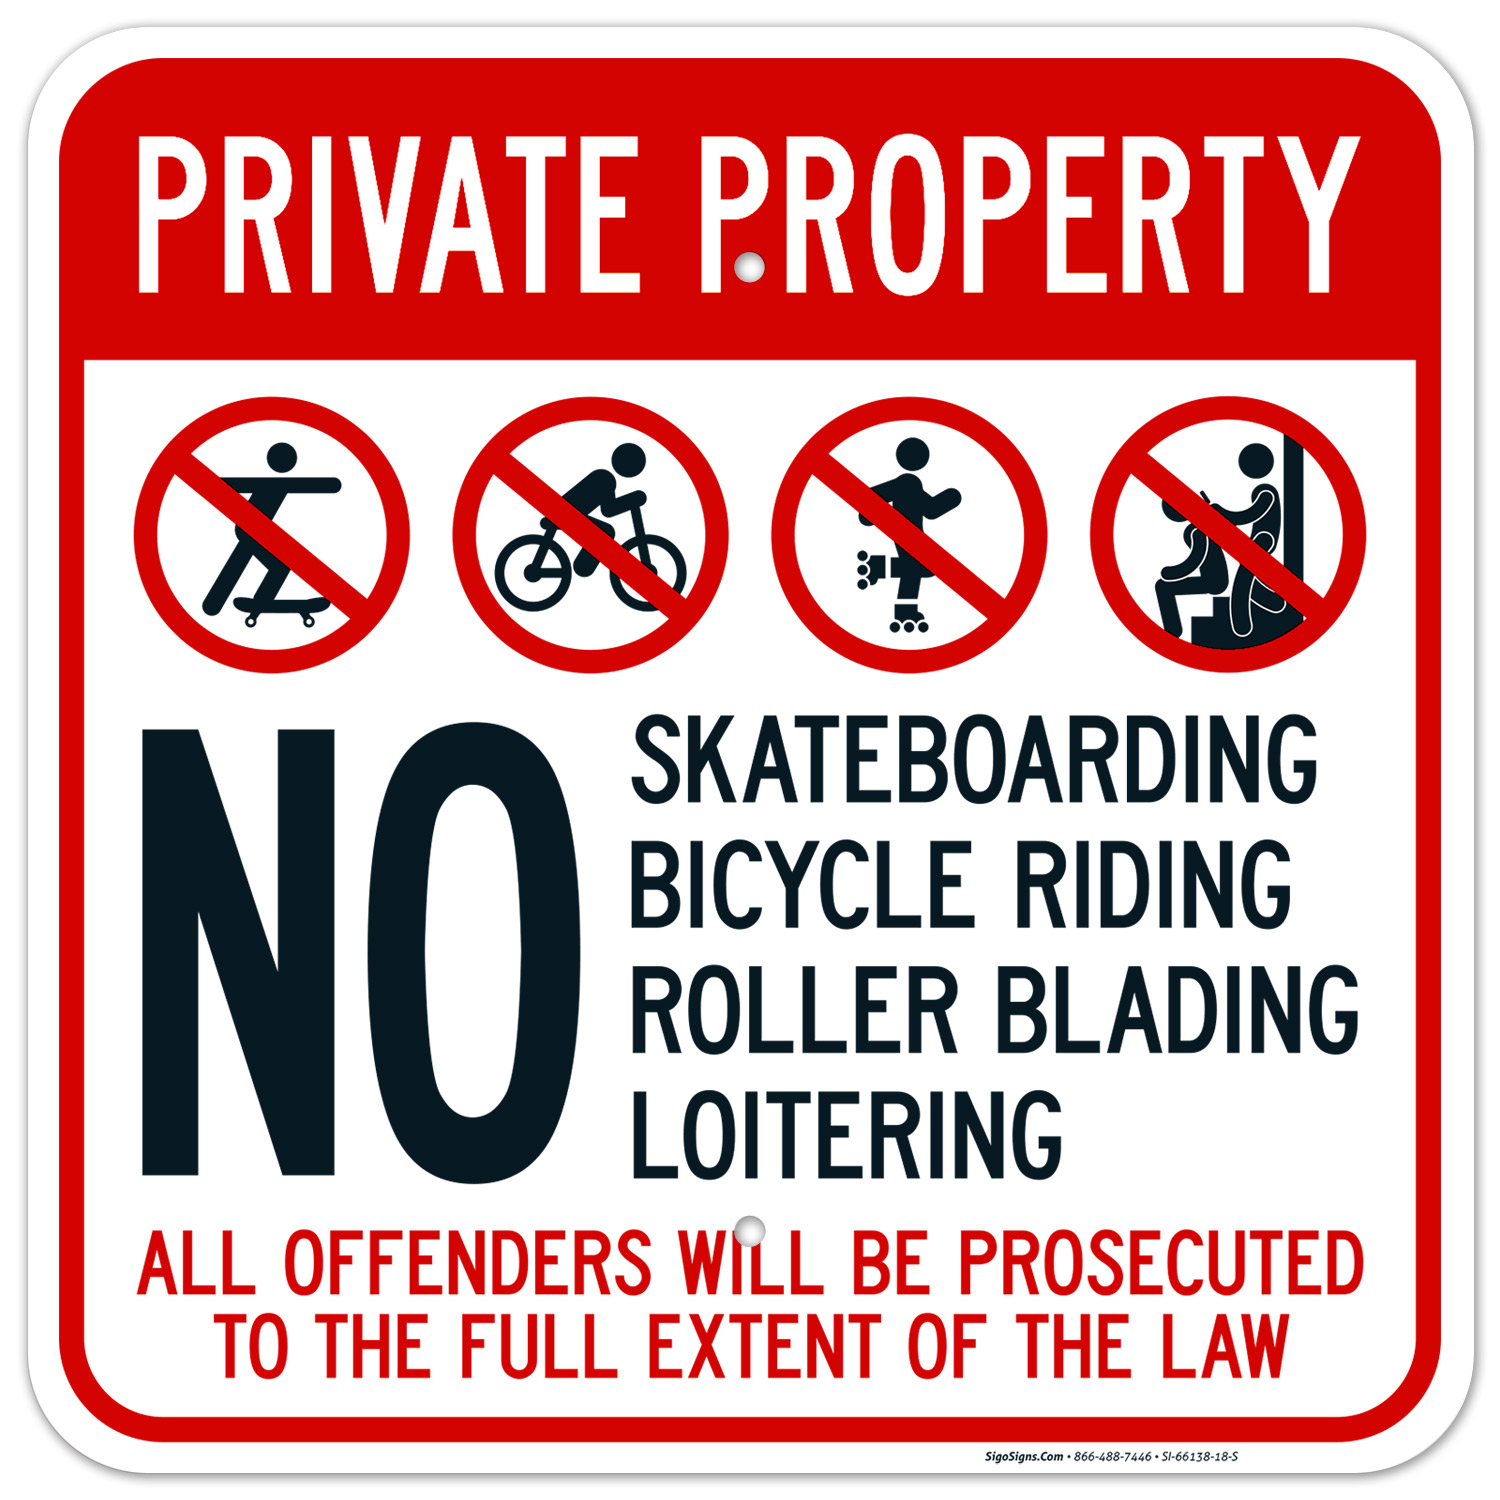 No Skateboarding Bicycle Riding Rollerblading Loitering Offenders Will Be Prosecuted Sign